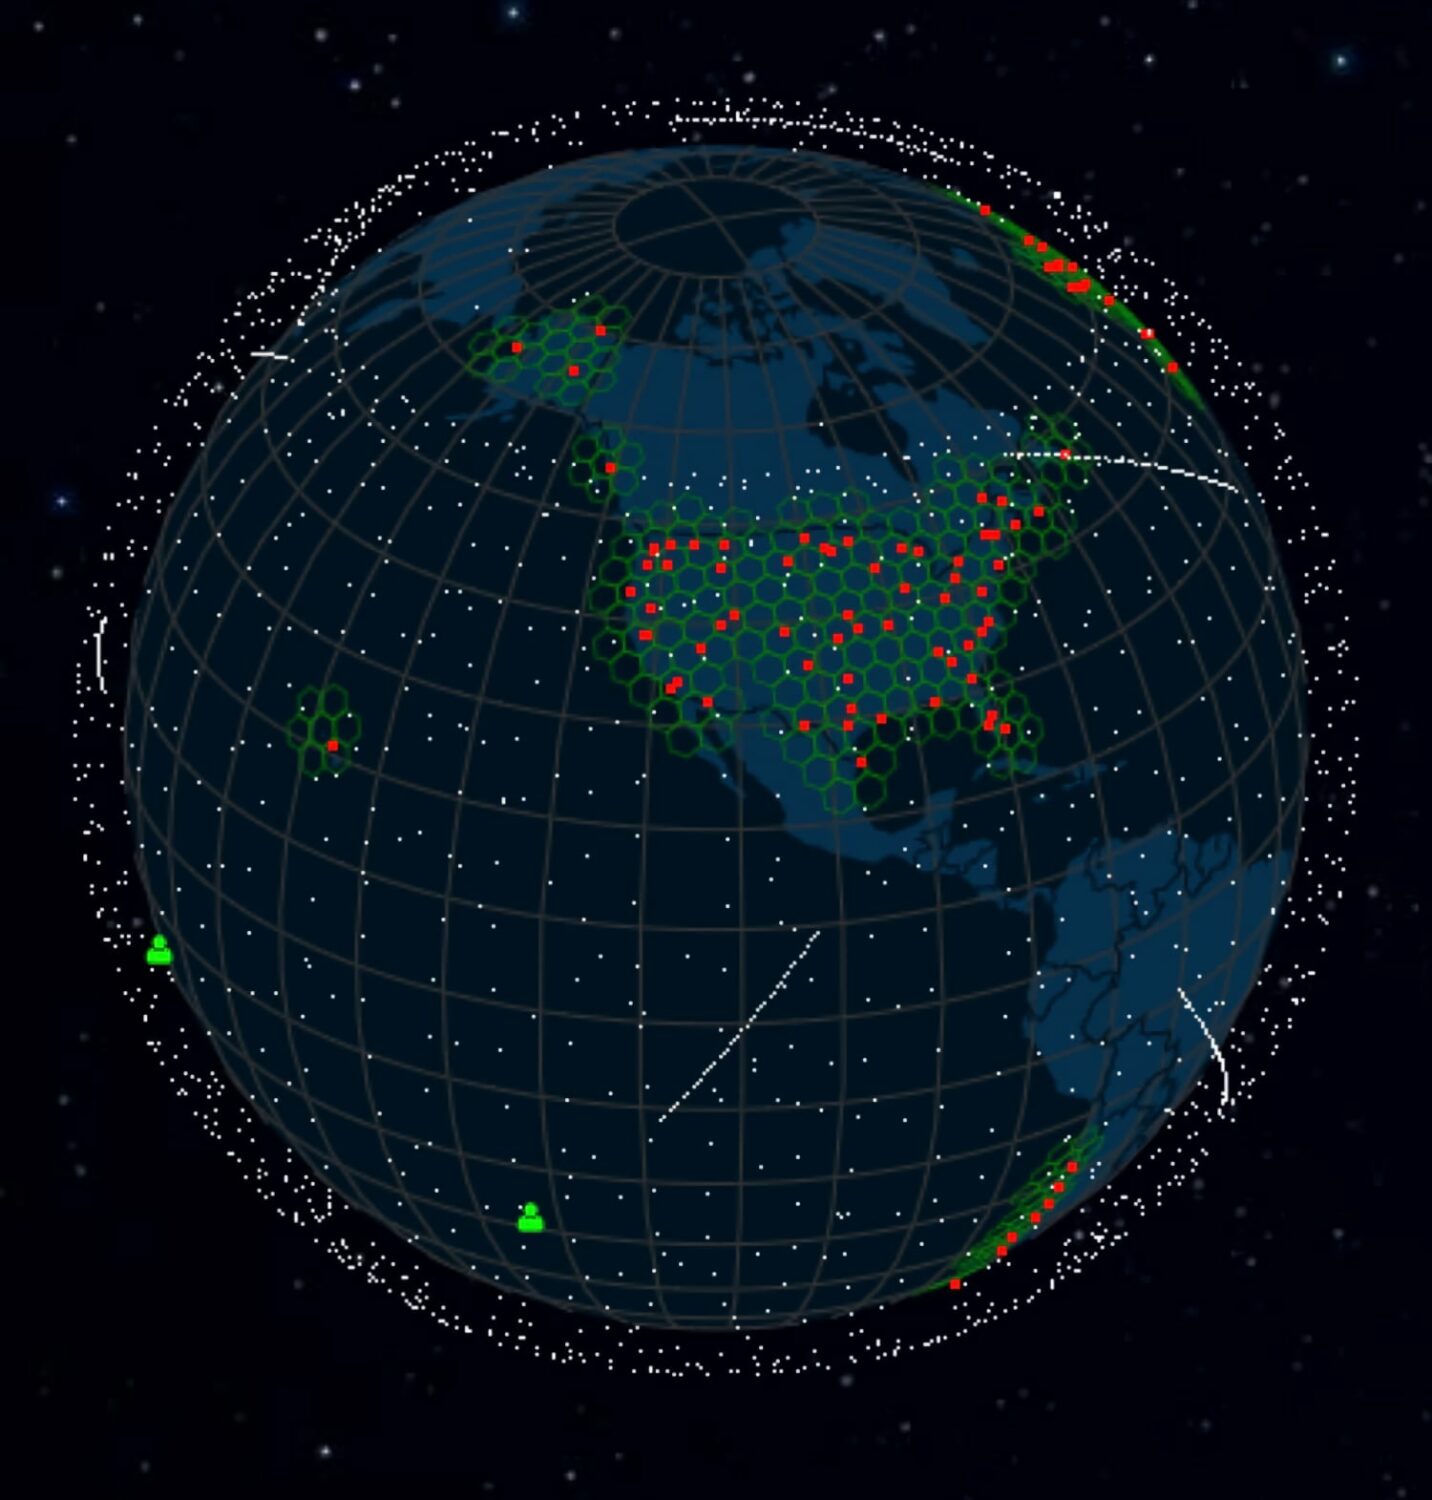 Starlink satellites orbiting the earth pick up the radio waves from me.